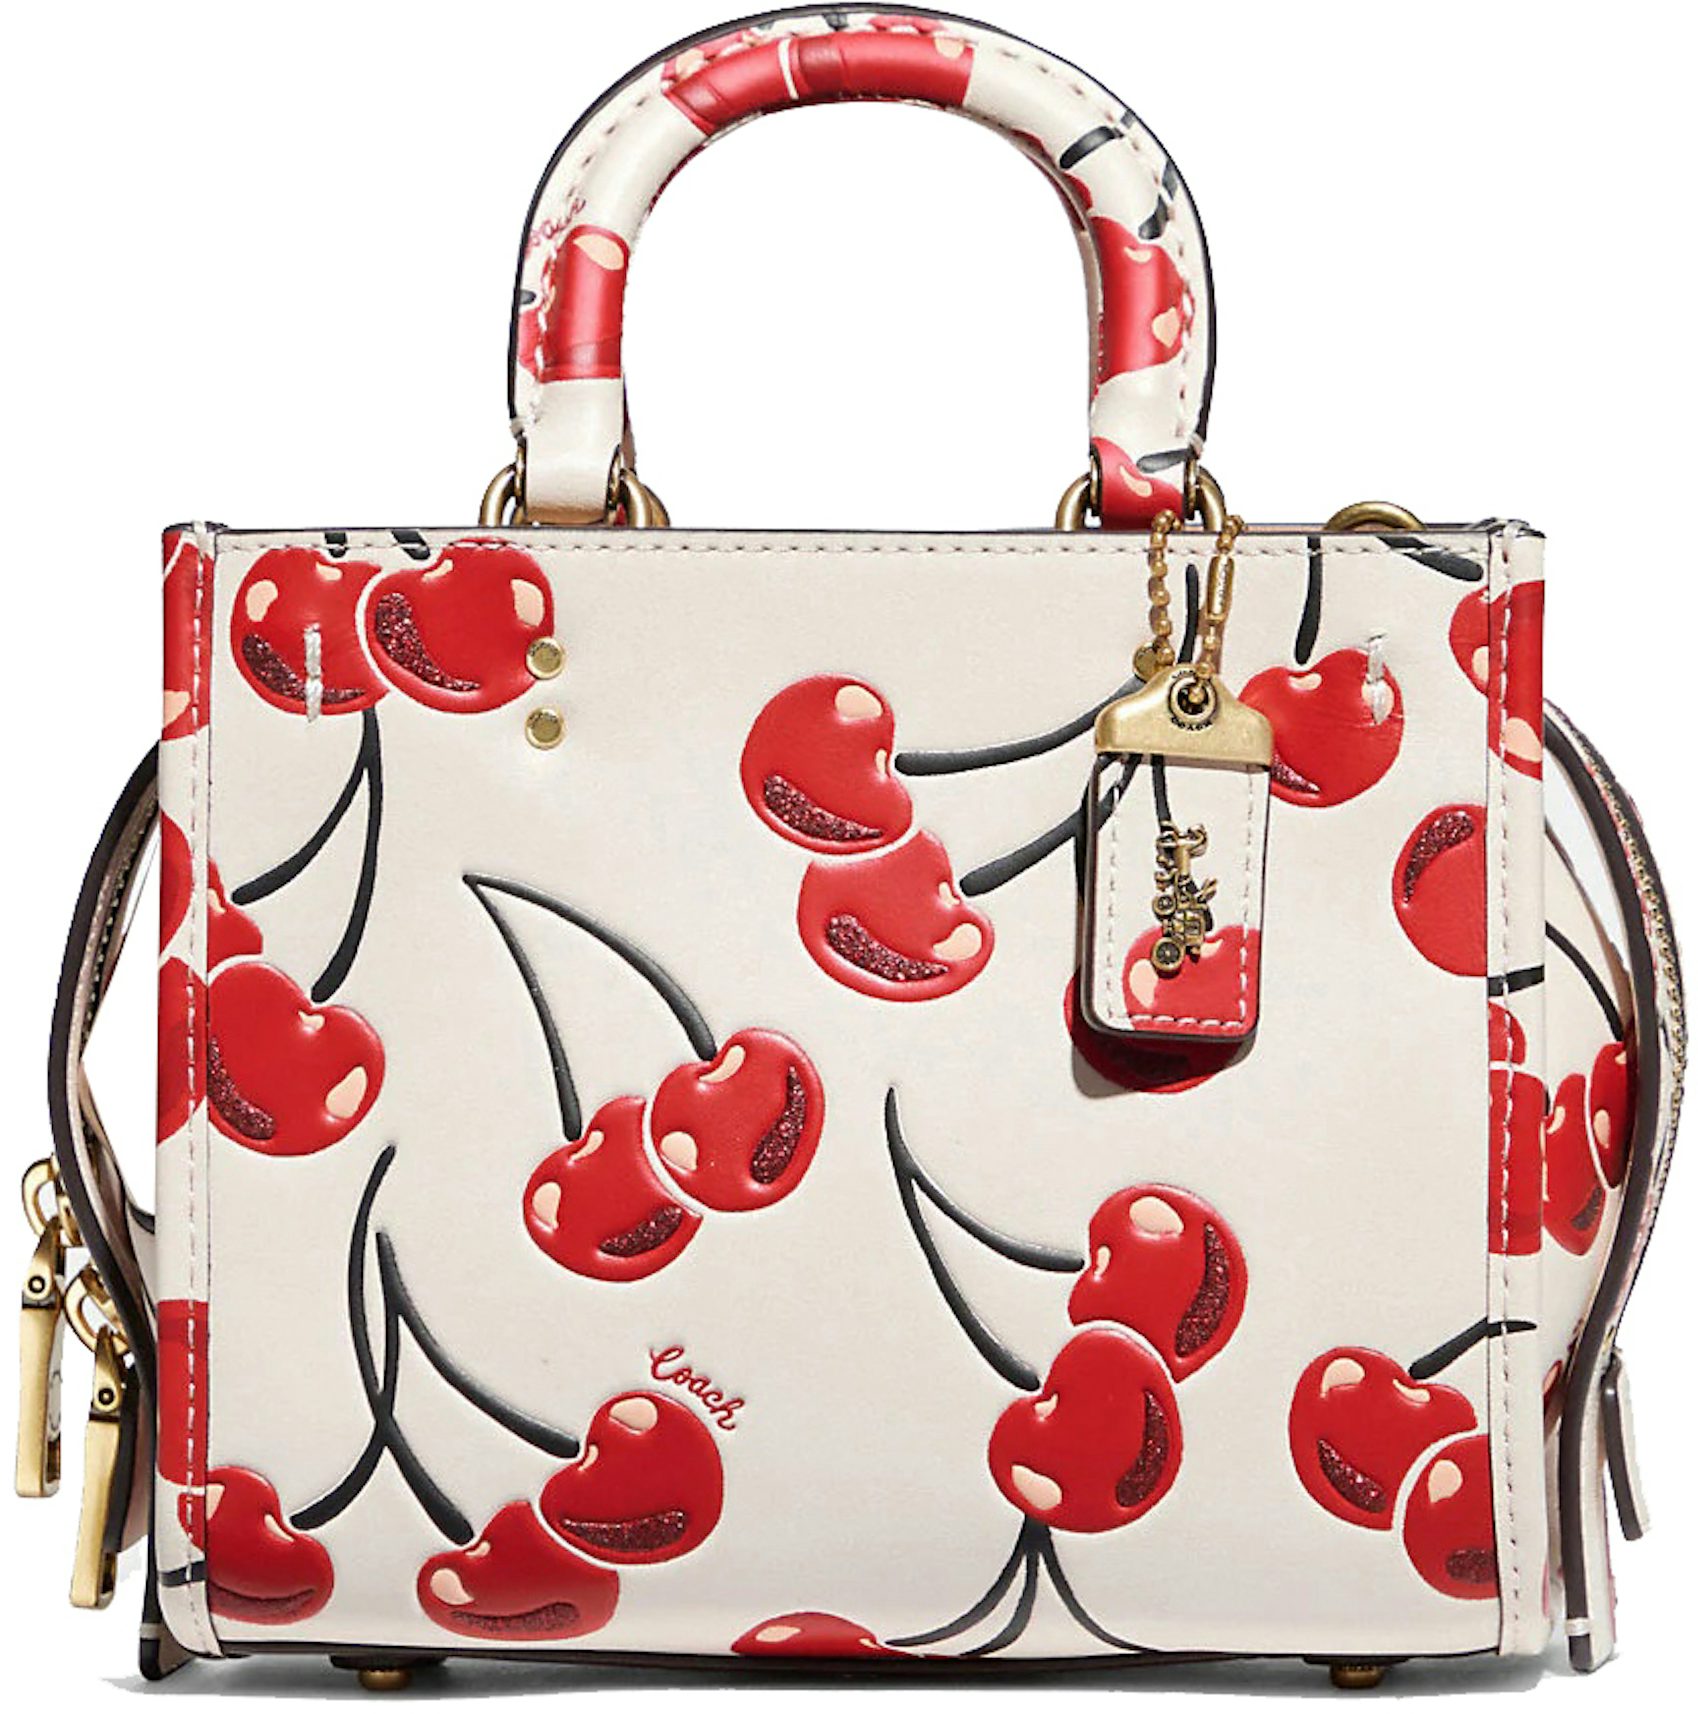 Soft Tabby Shoulder Bag With Cherry Print - Coach